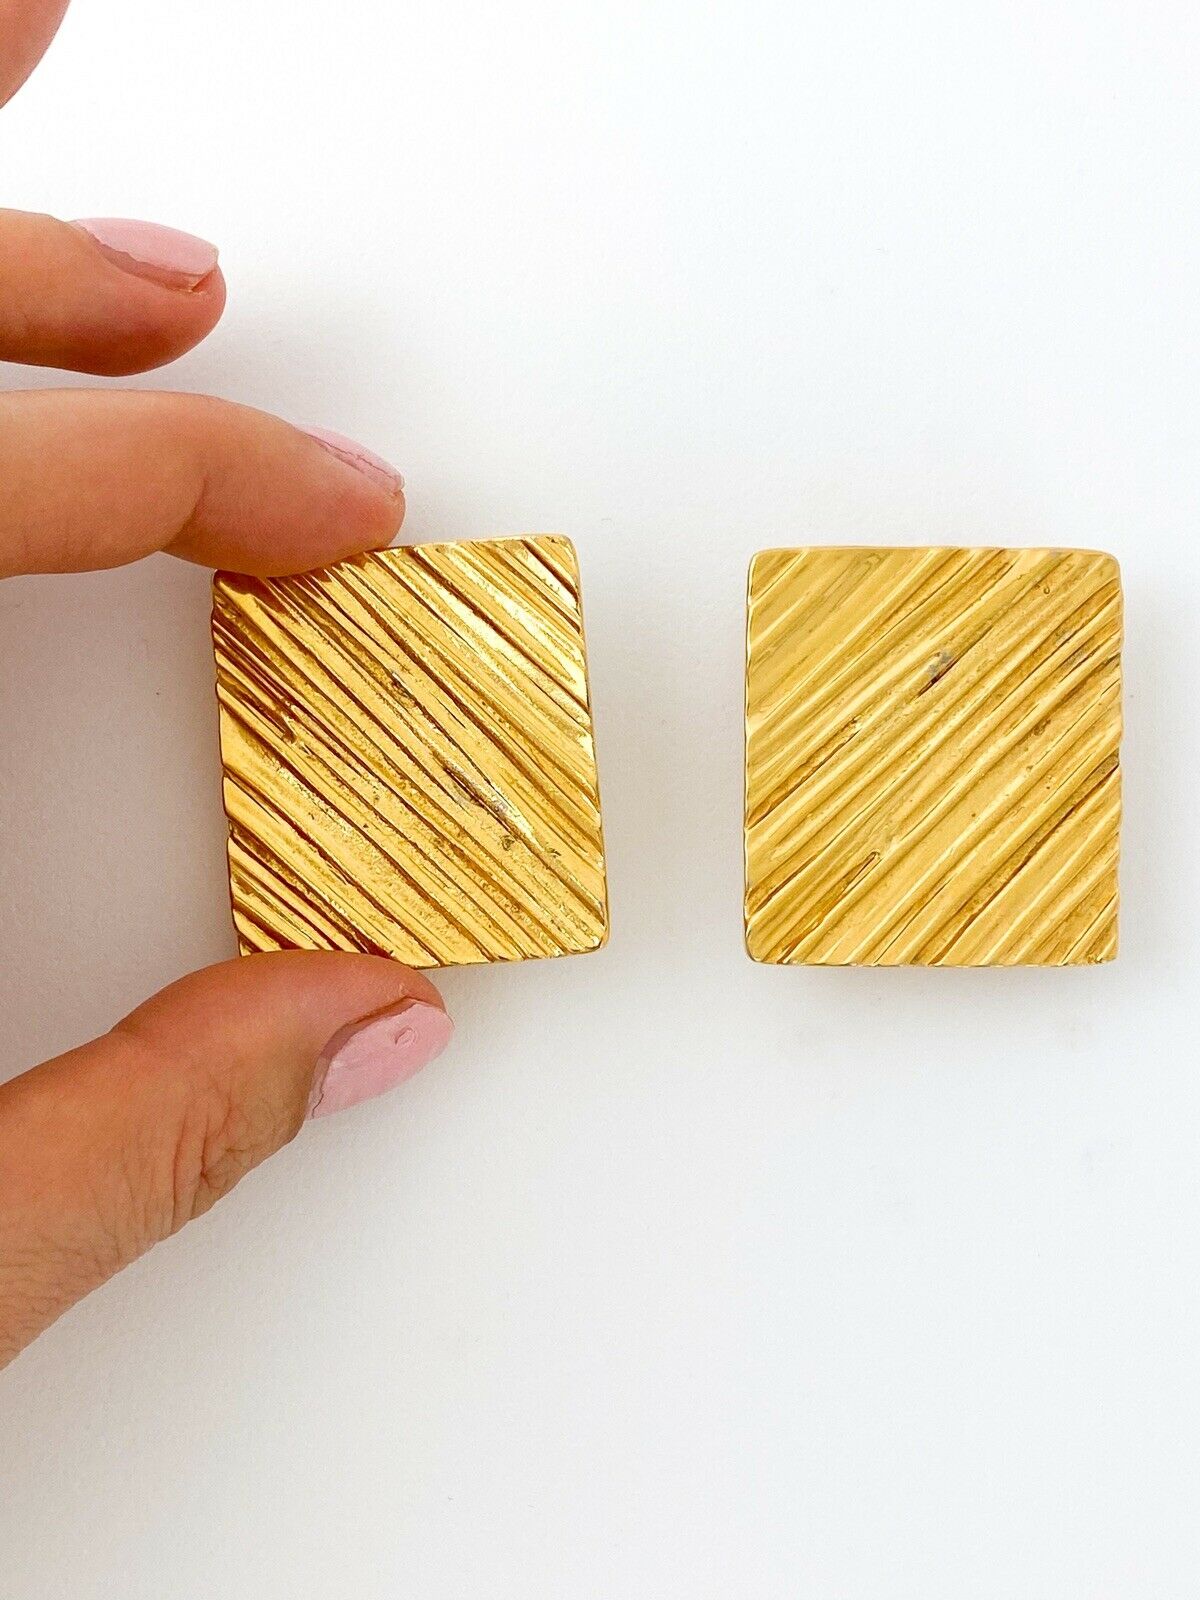 【SOLD OUT】YSL YVES SAINT LAURENT VINTAGE TEXTURED GOLD PLATED EARRINGS RECTANGLE